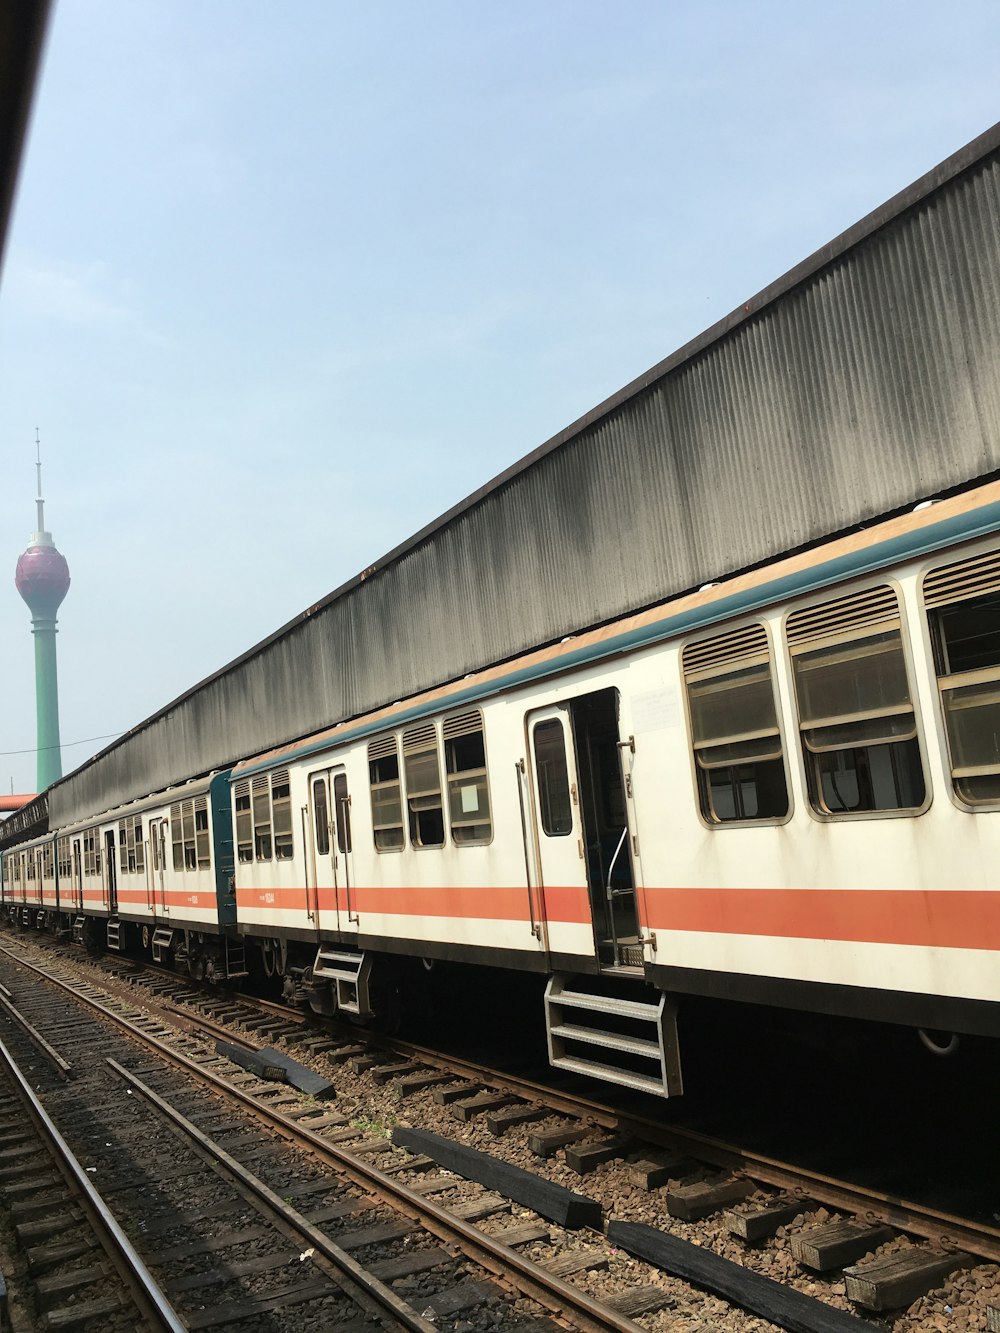 white, orange, and green train under blue and white sky during daytime